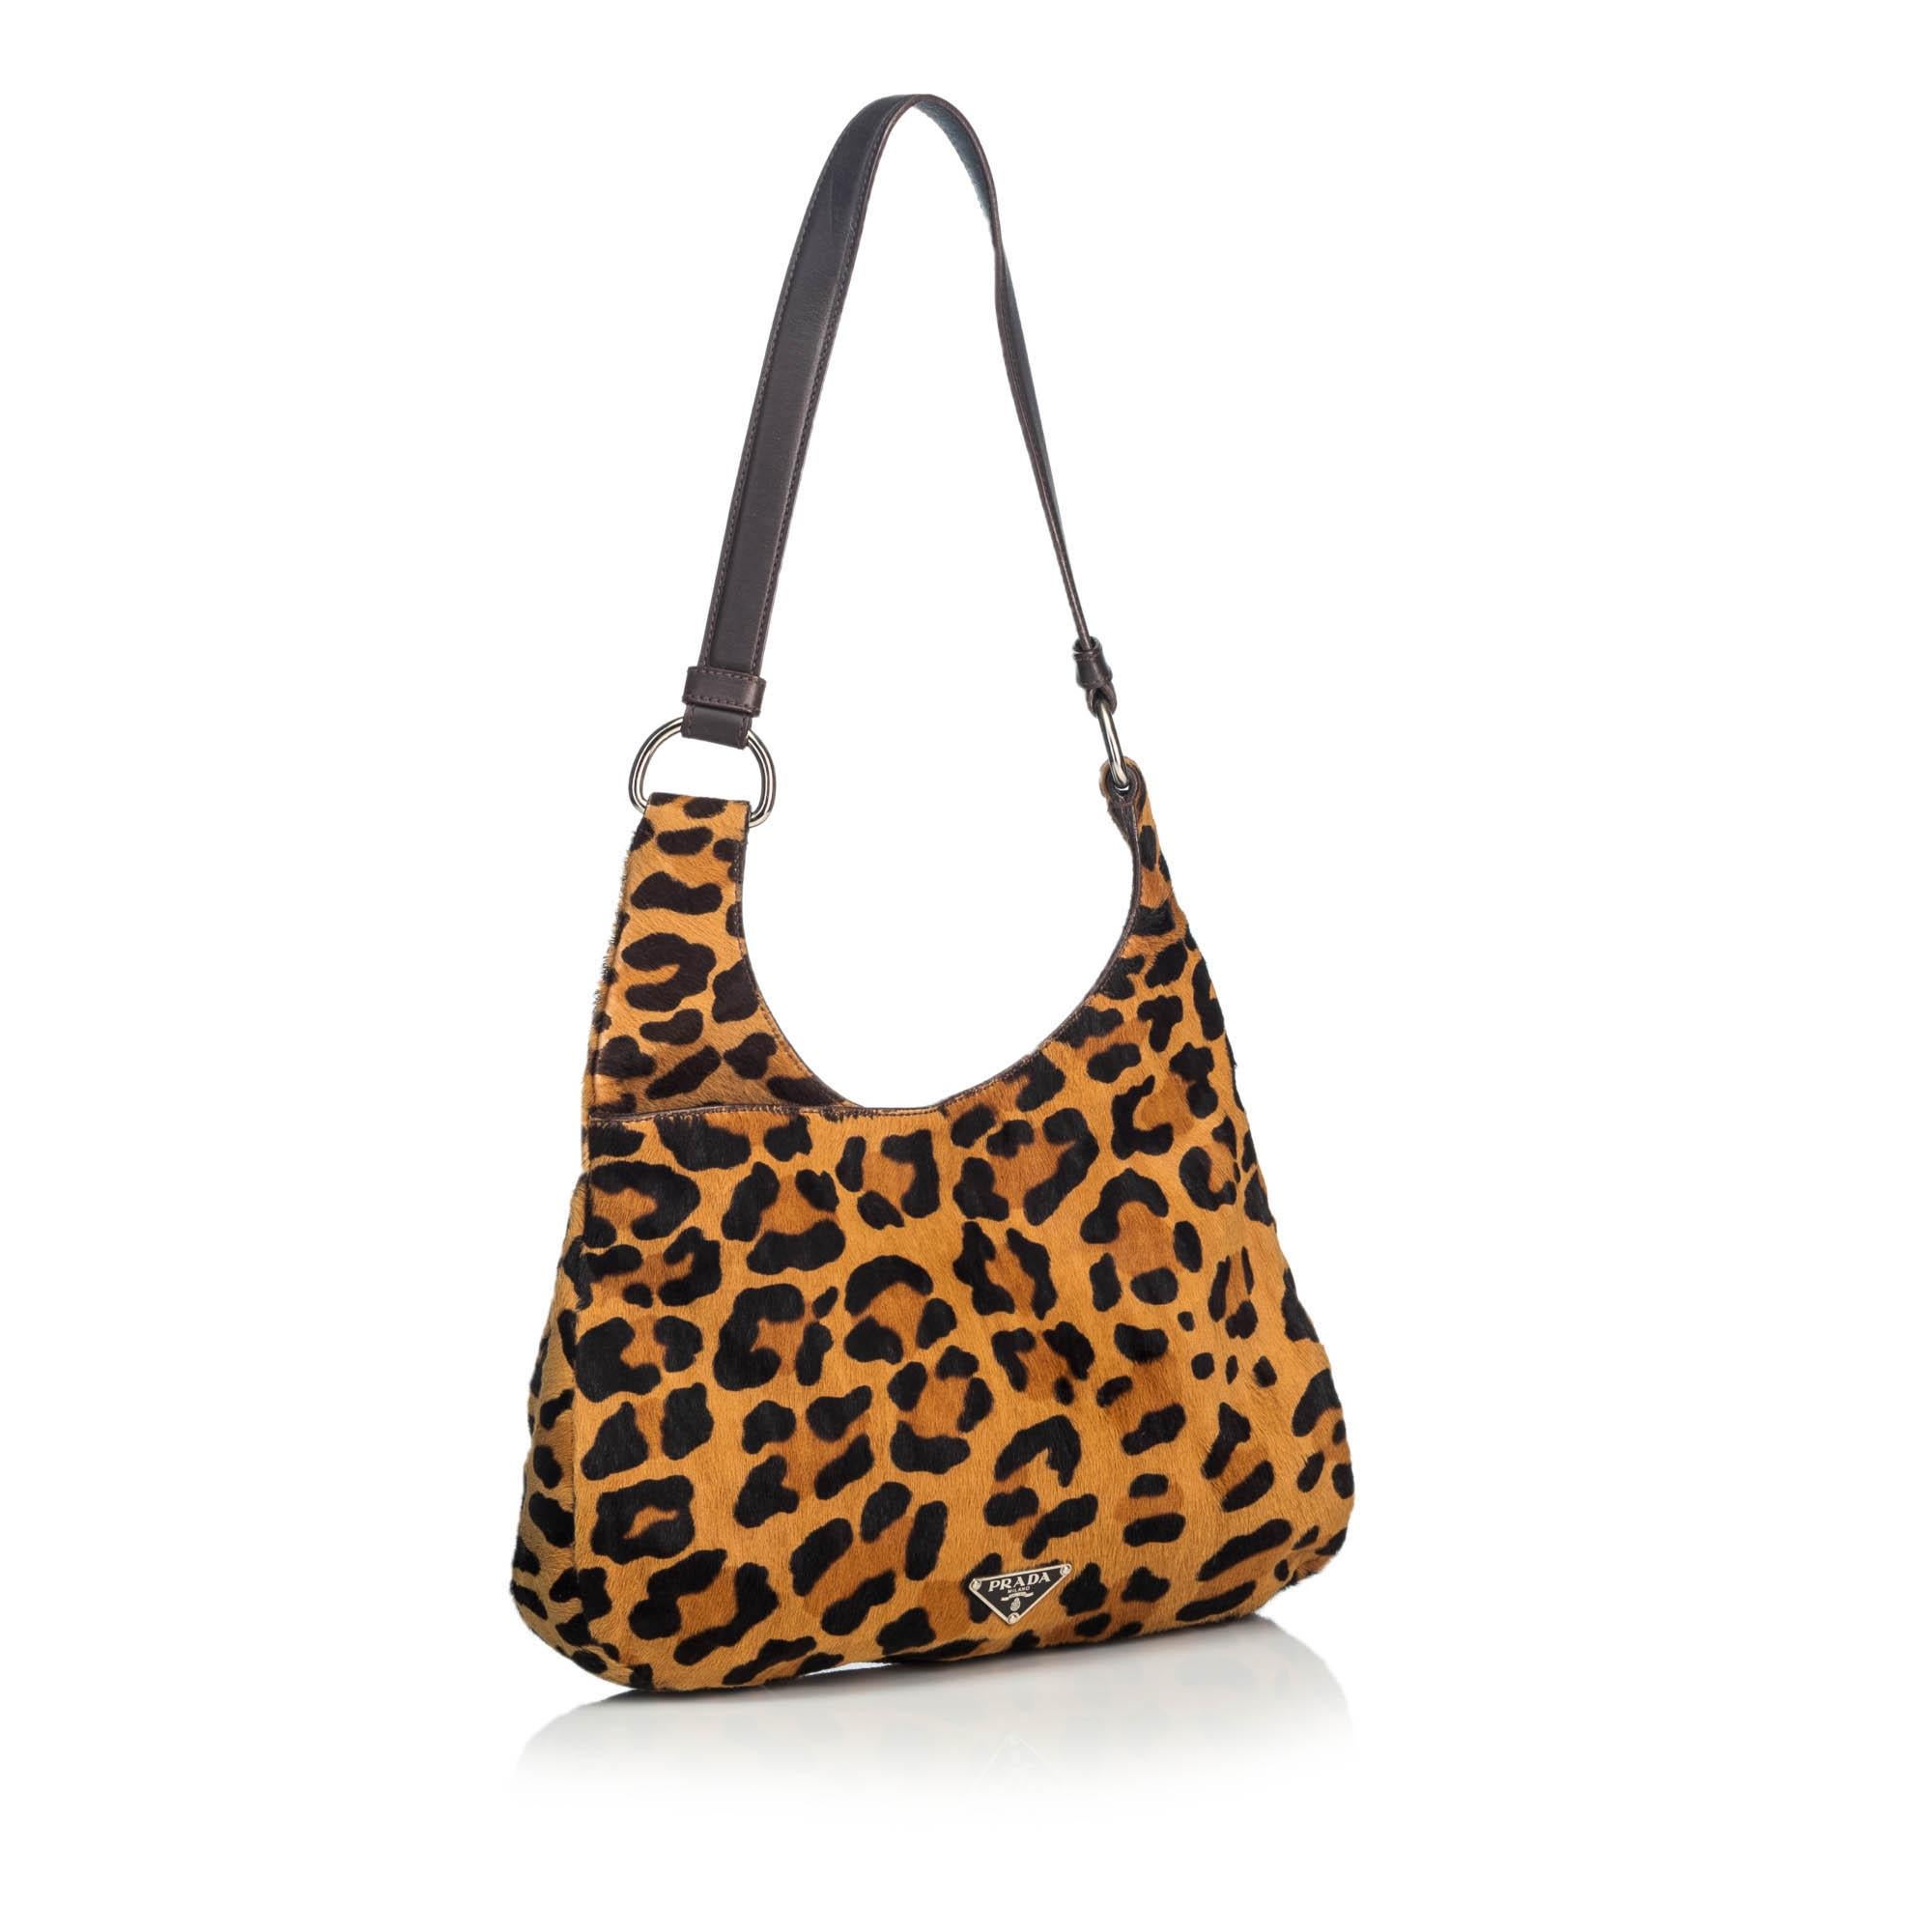 This hobo bag features a leopard print ponyhair body, a flat leather strap, an open top with a push lock closure, and an interior zip pocket It carries as B+ condition rating.

Inclusions: 
This item does not come with